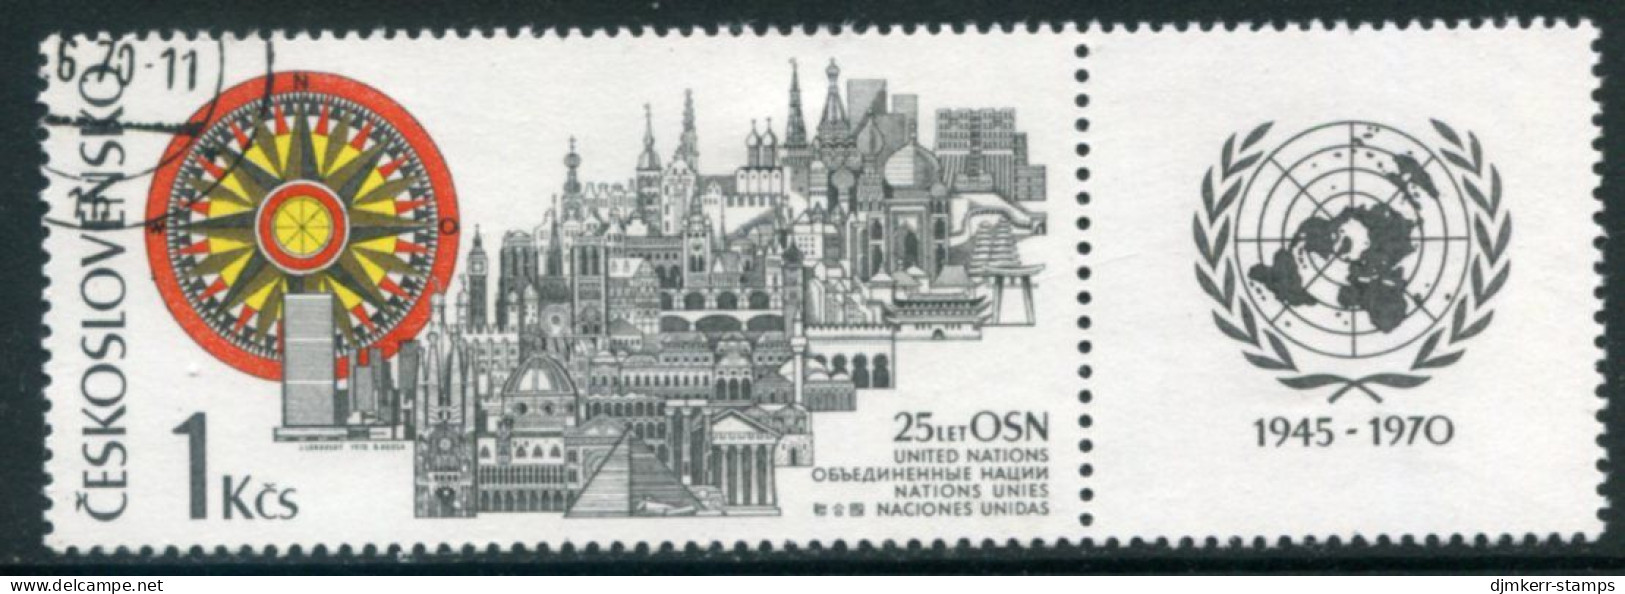 CZECHOSLOVAKIA 1970 UNO 25th Anniversary With Label Used Michel 1945 Zf - Gebraucht